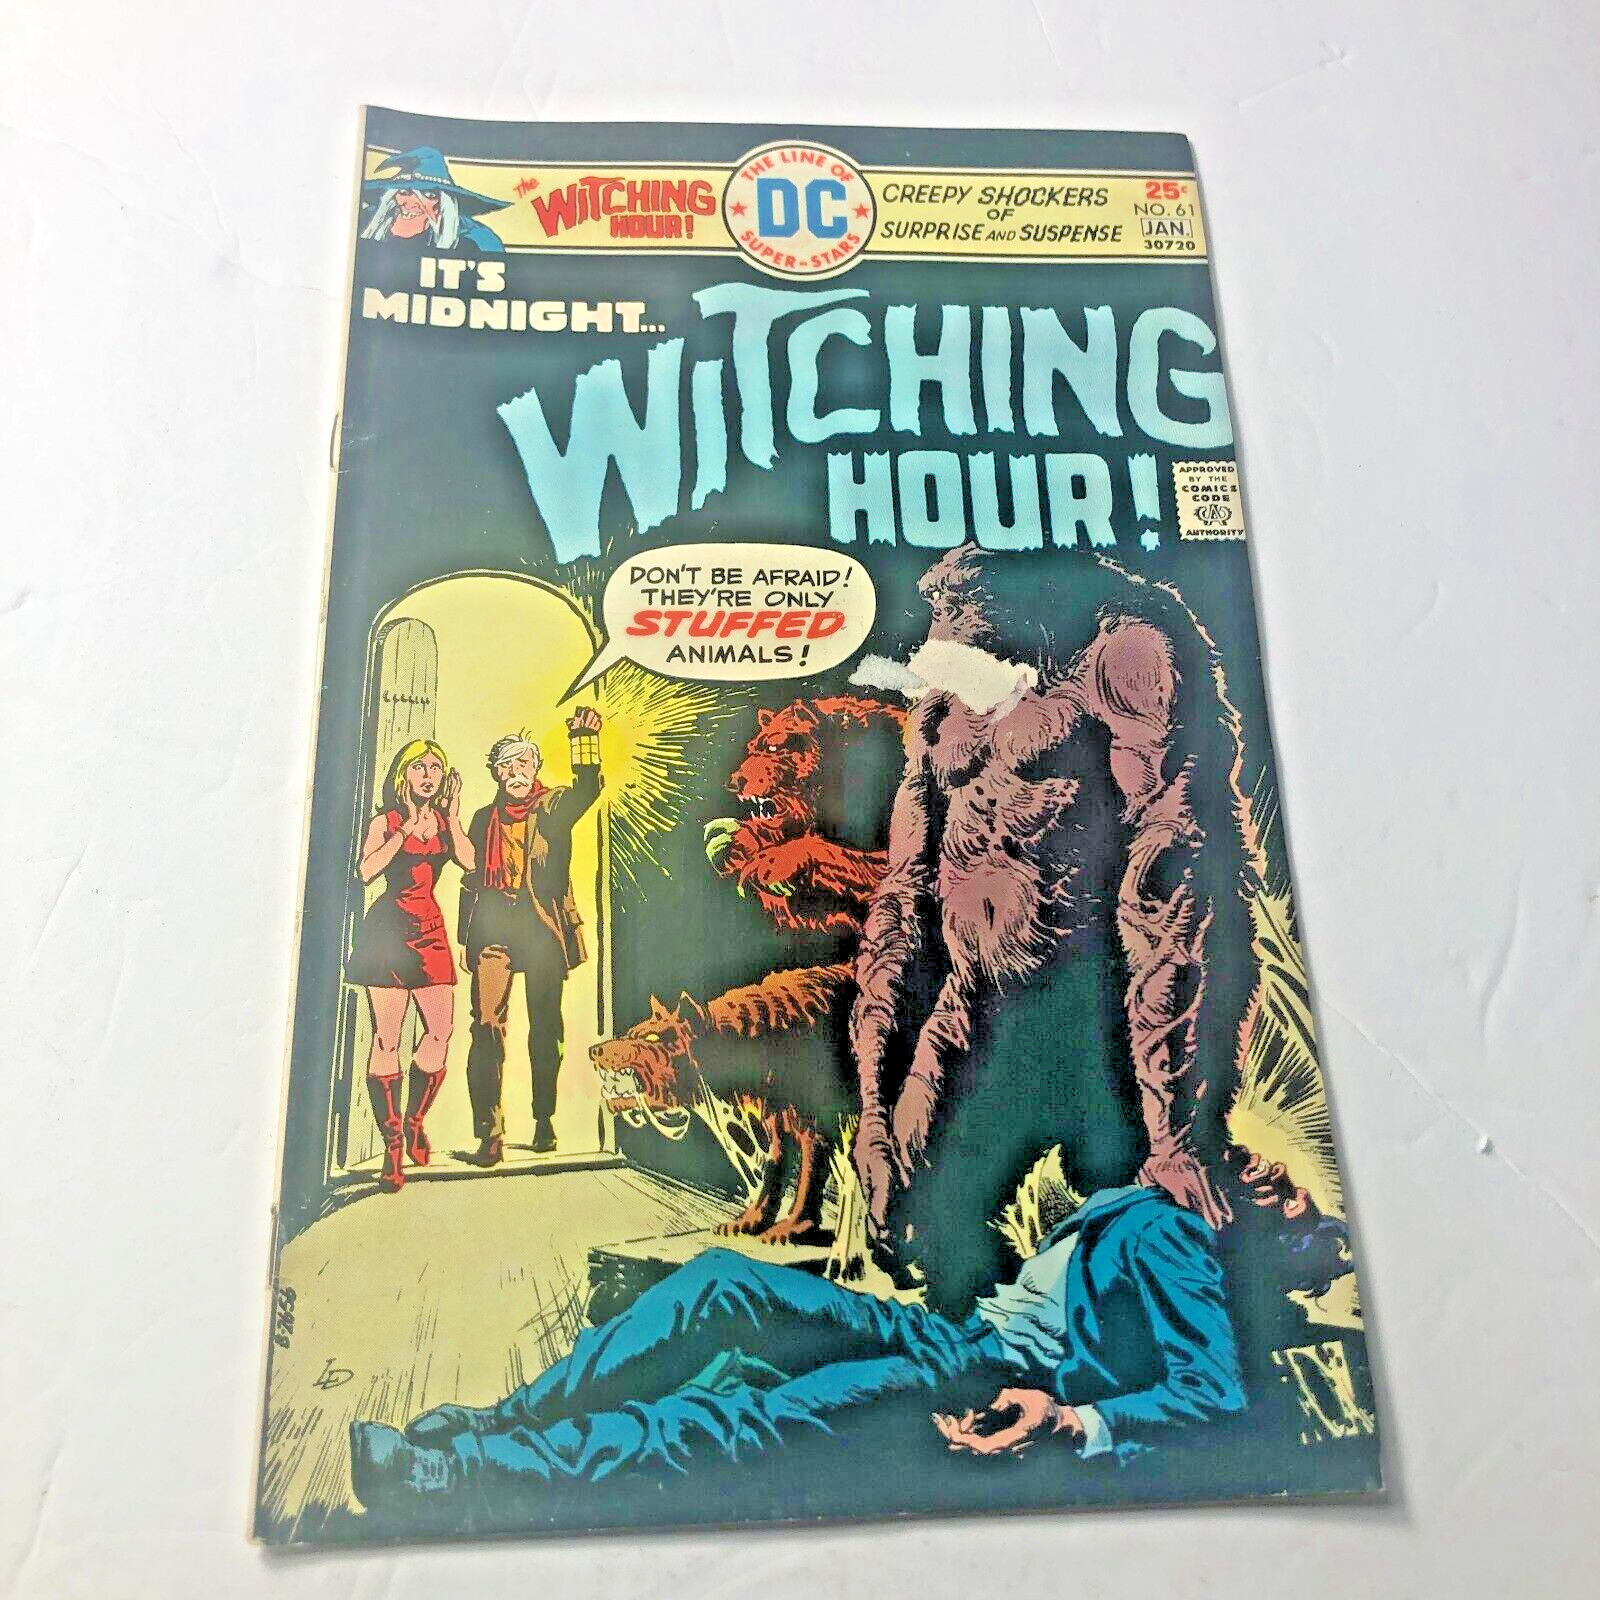 Witching Hour, DC Comic, Vol 7 No 61. December 1975-January 1976, Good condition